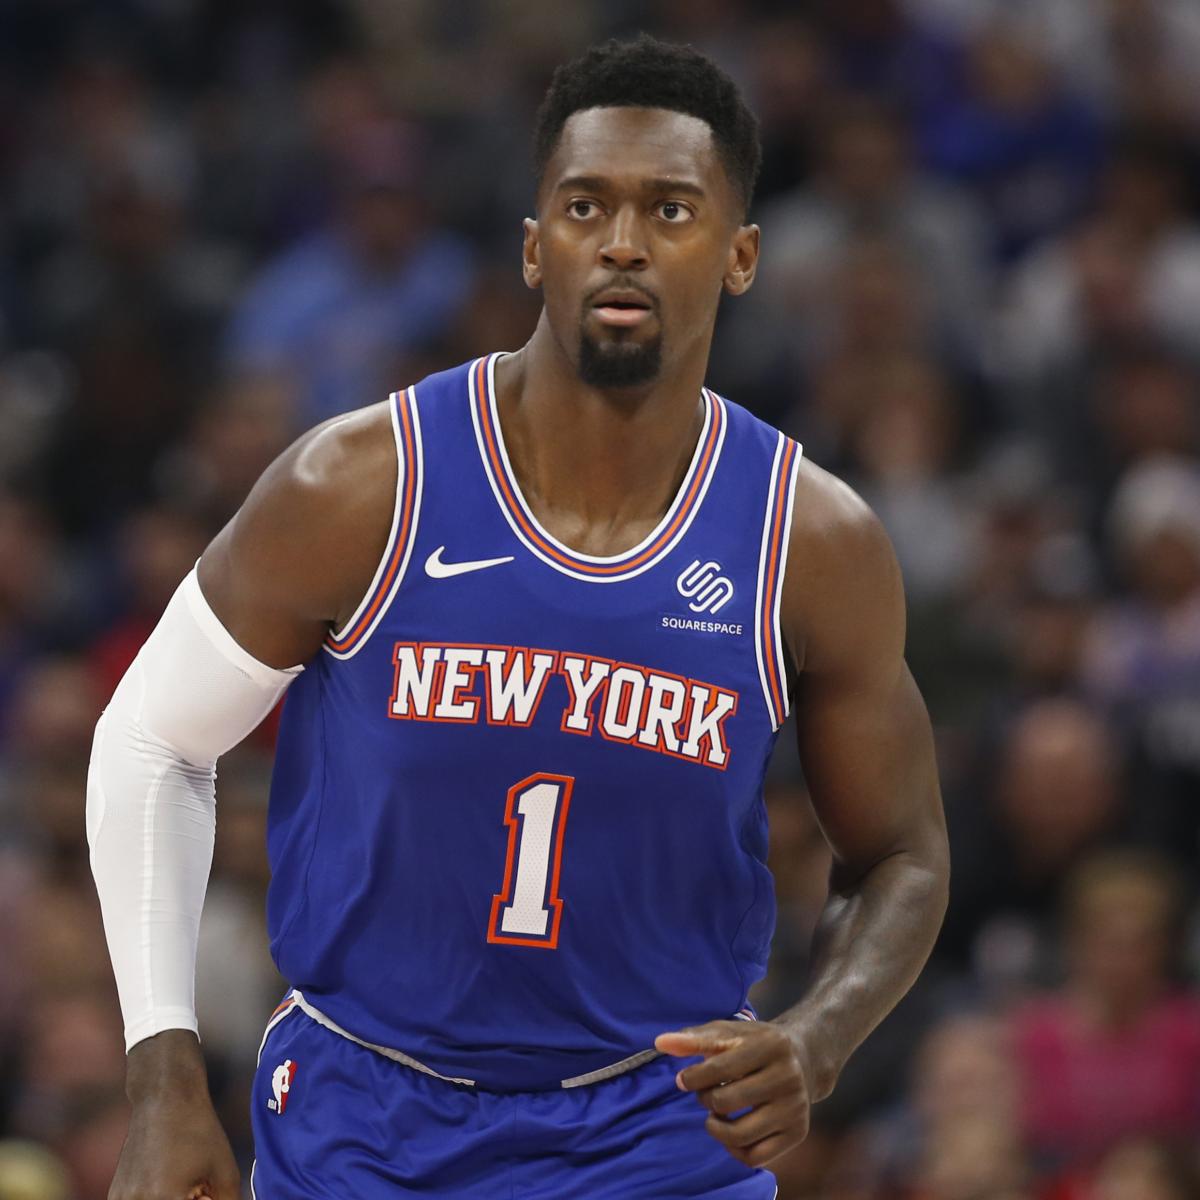 Bobby Portis - NBA Power forward - News, Stats, Bio and more - The Athletic